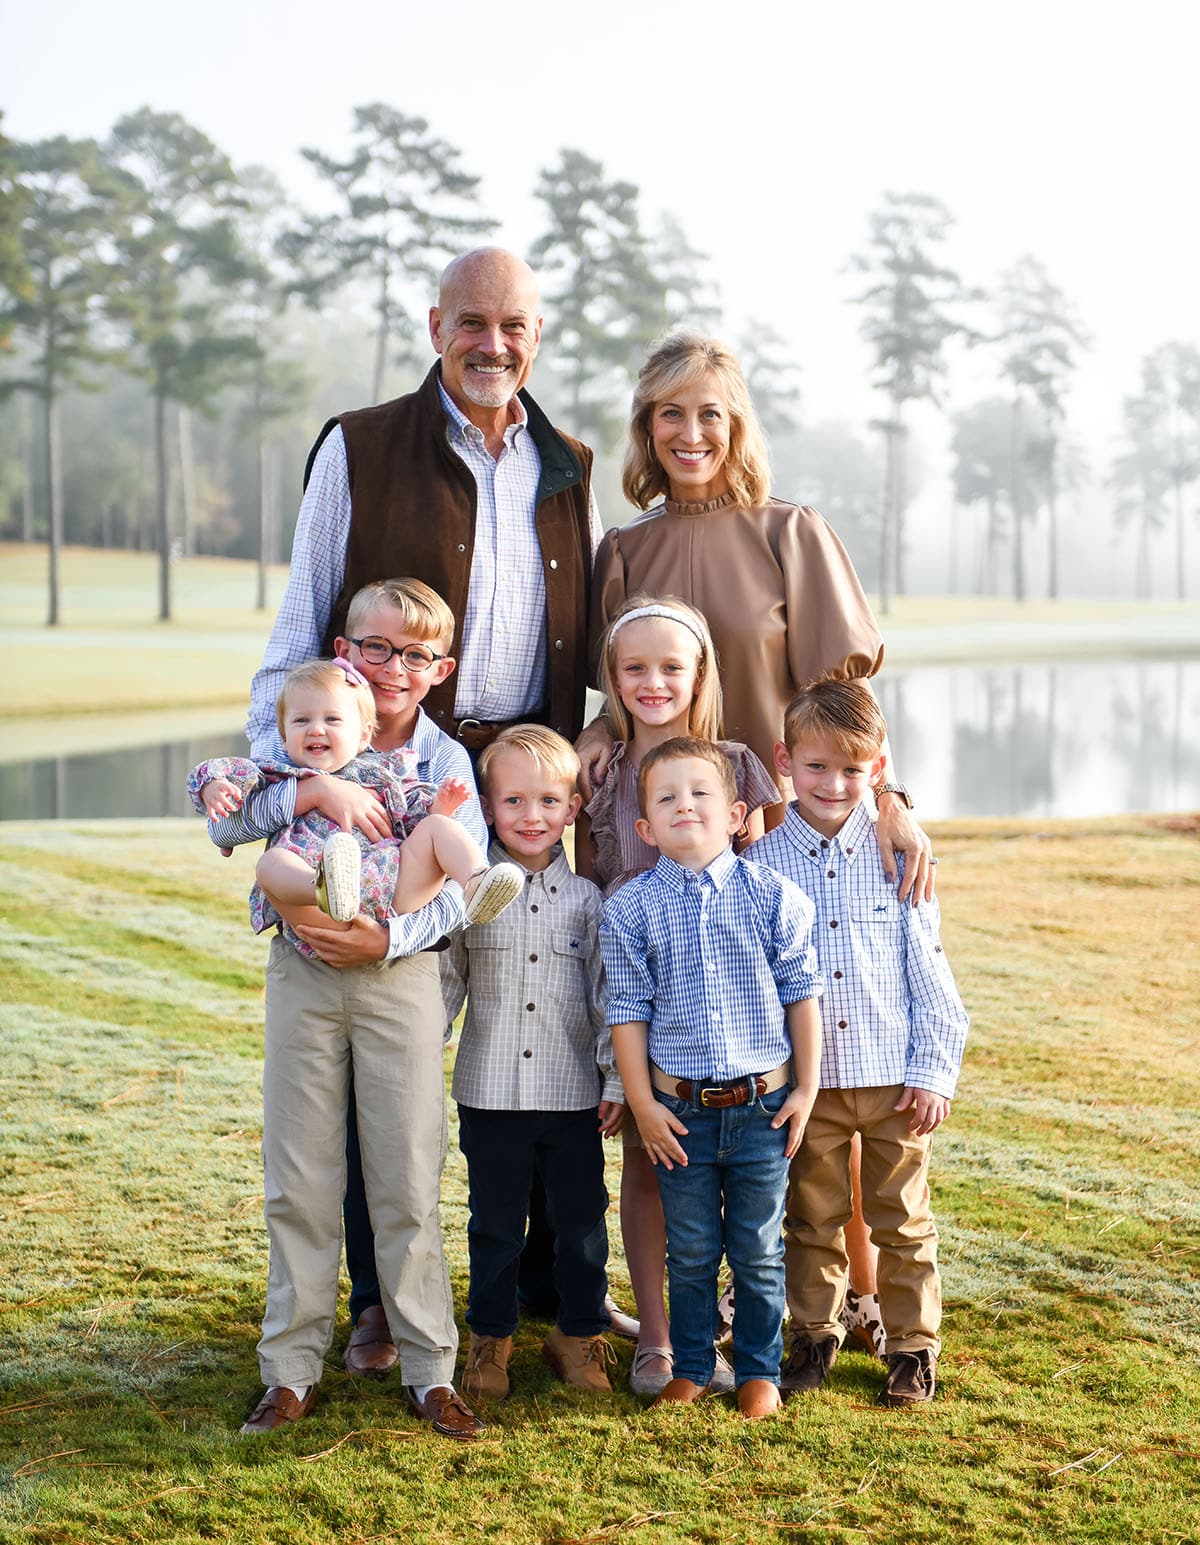 A family portrait with two adults and five young children standing outside on a grassy area with a misty lake in the background.